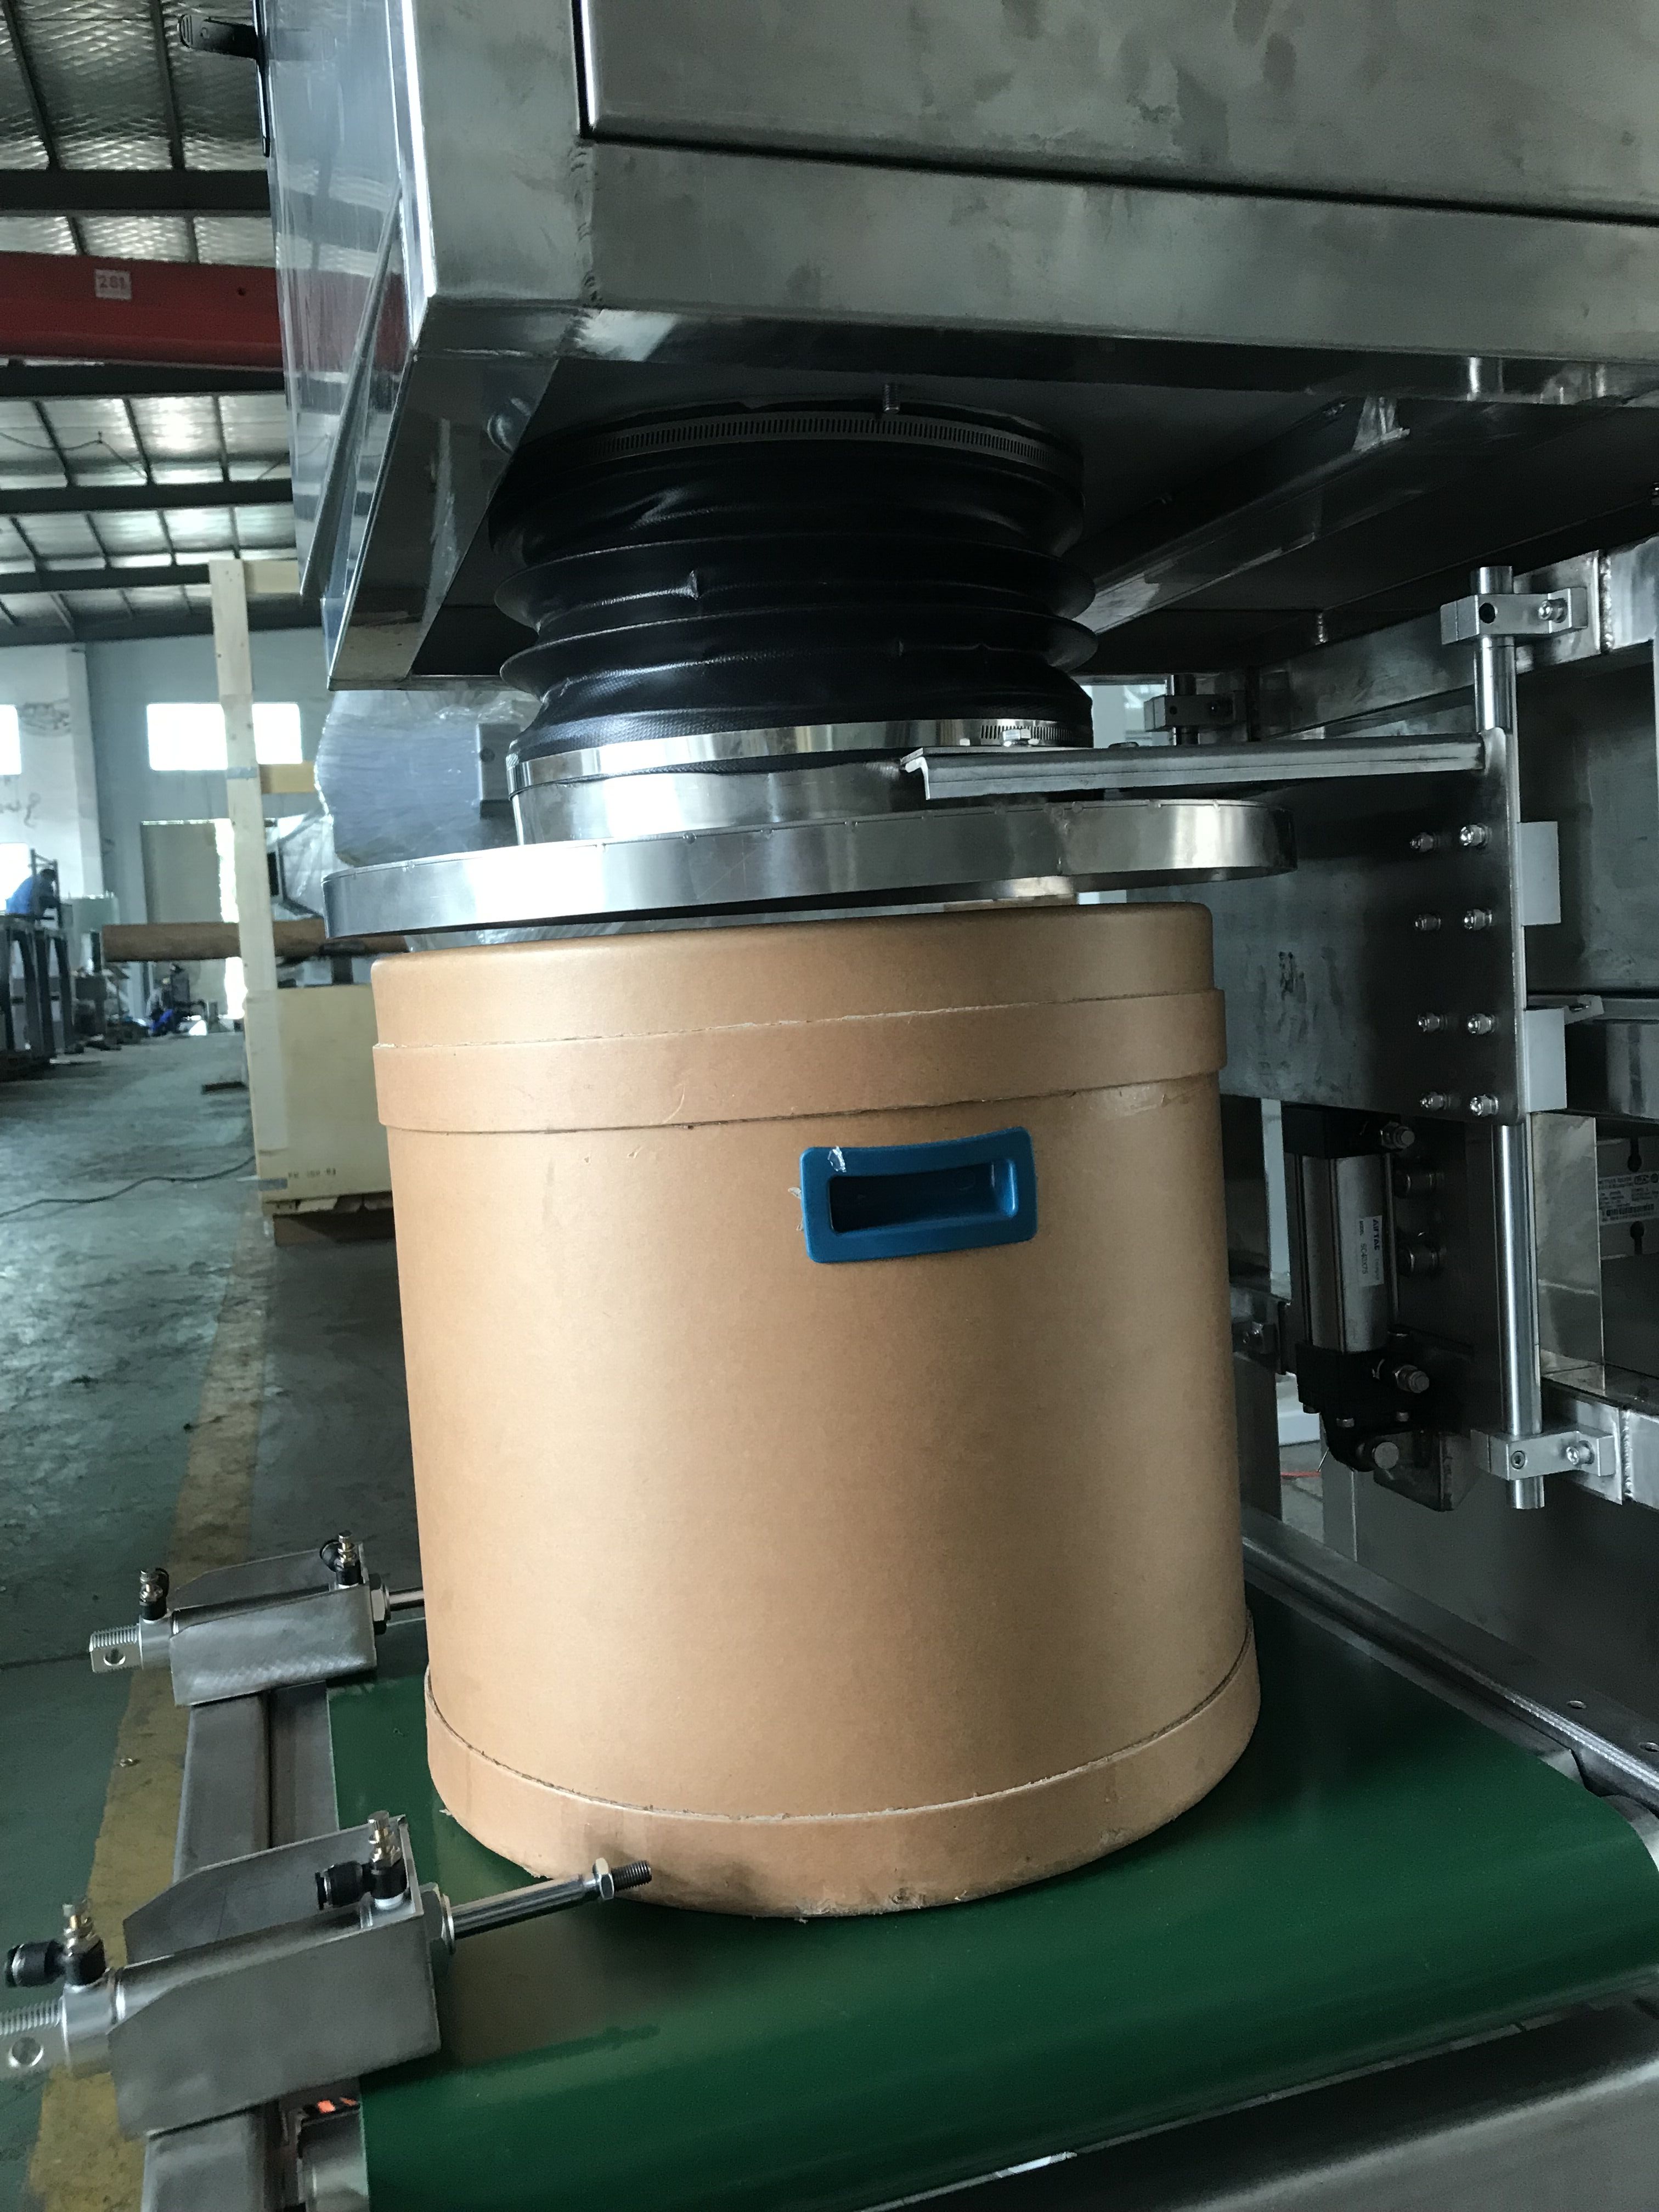 Pails Filling Machine drum Filling Machine buckets Filling Machine small bags packing machine for for both granular and powder products AUTOMATIC VFFS PACKING MACHINE BAGGING & PALLETIZING MACHINE Ful